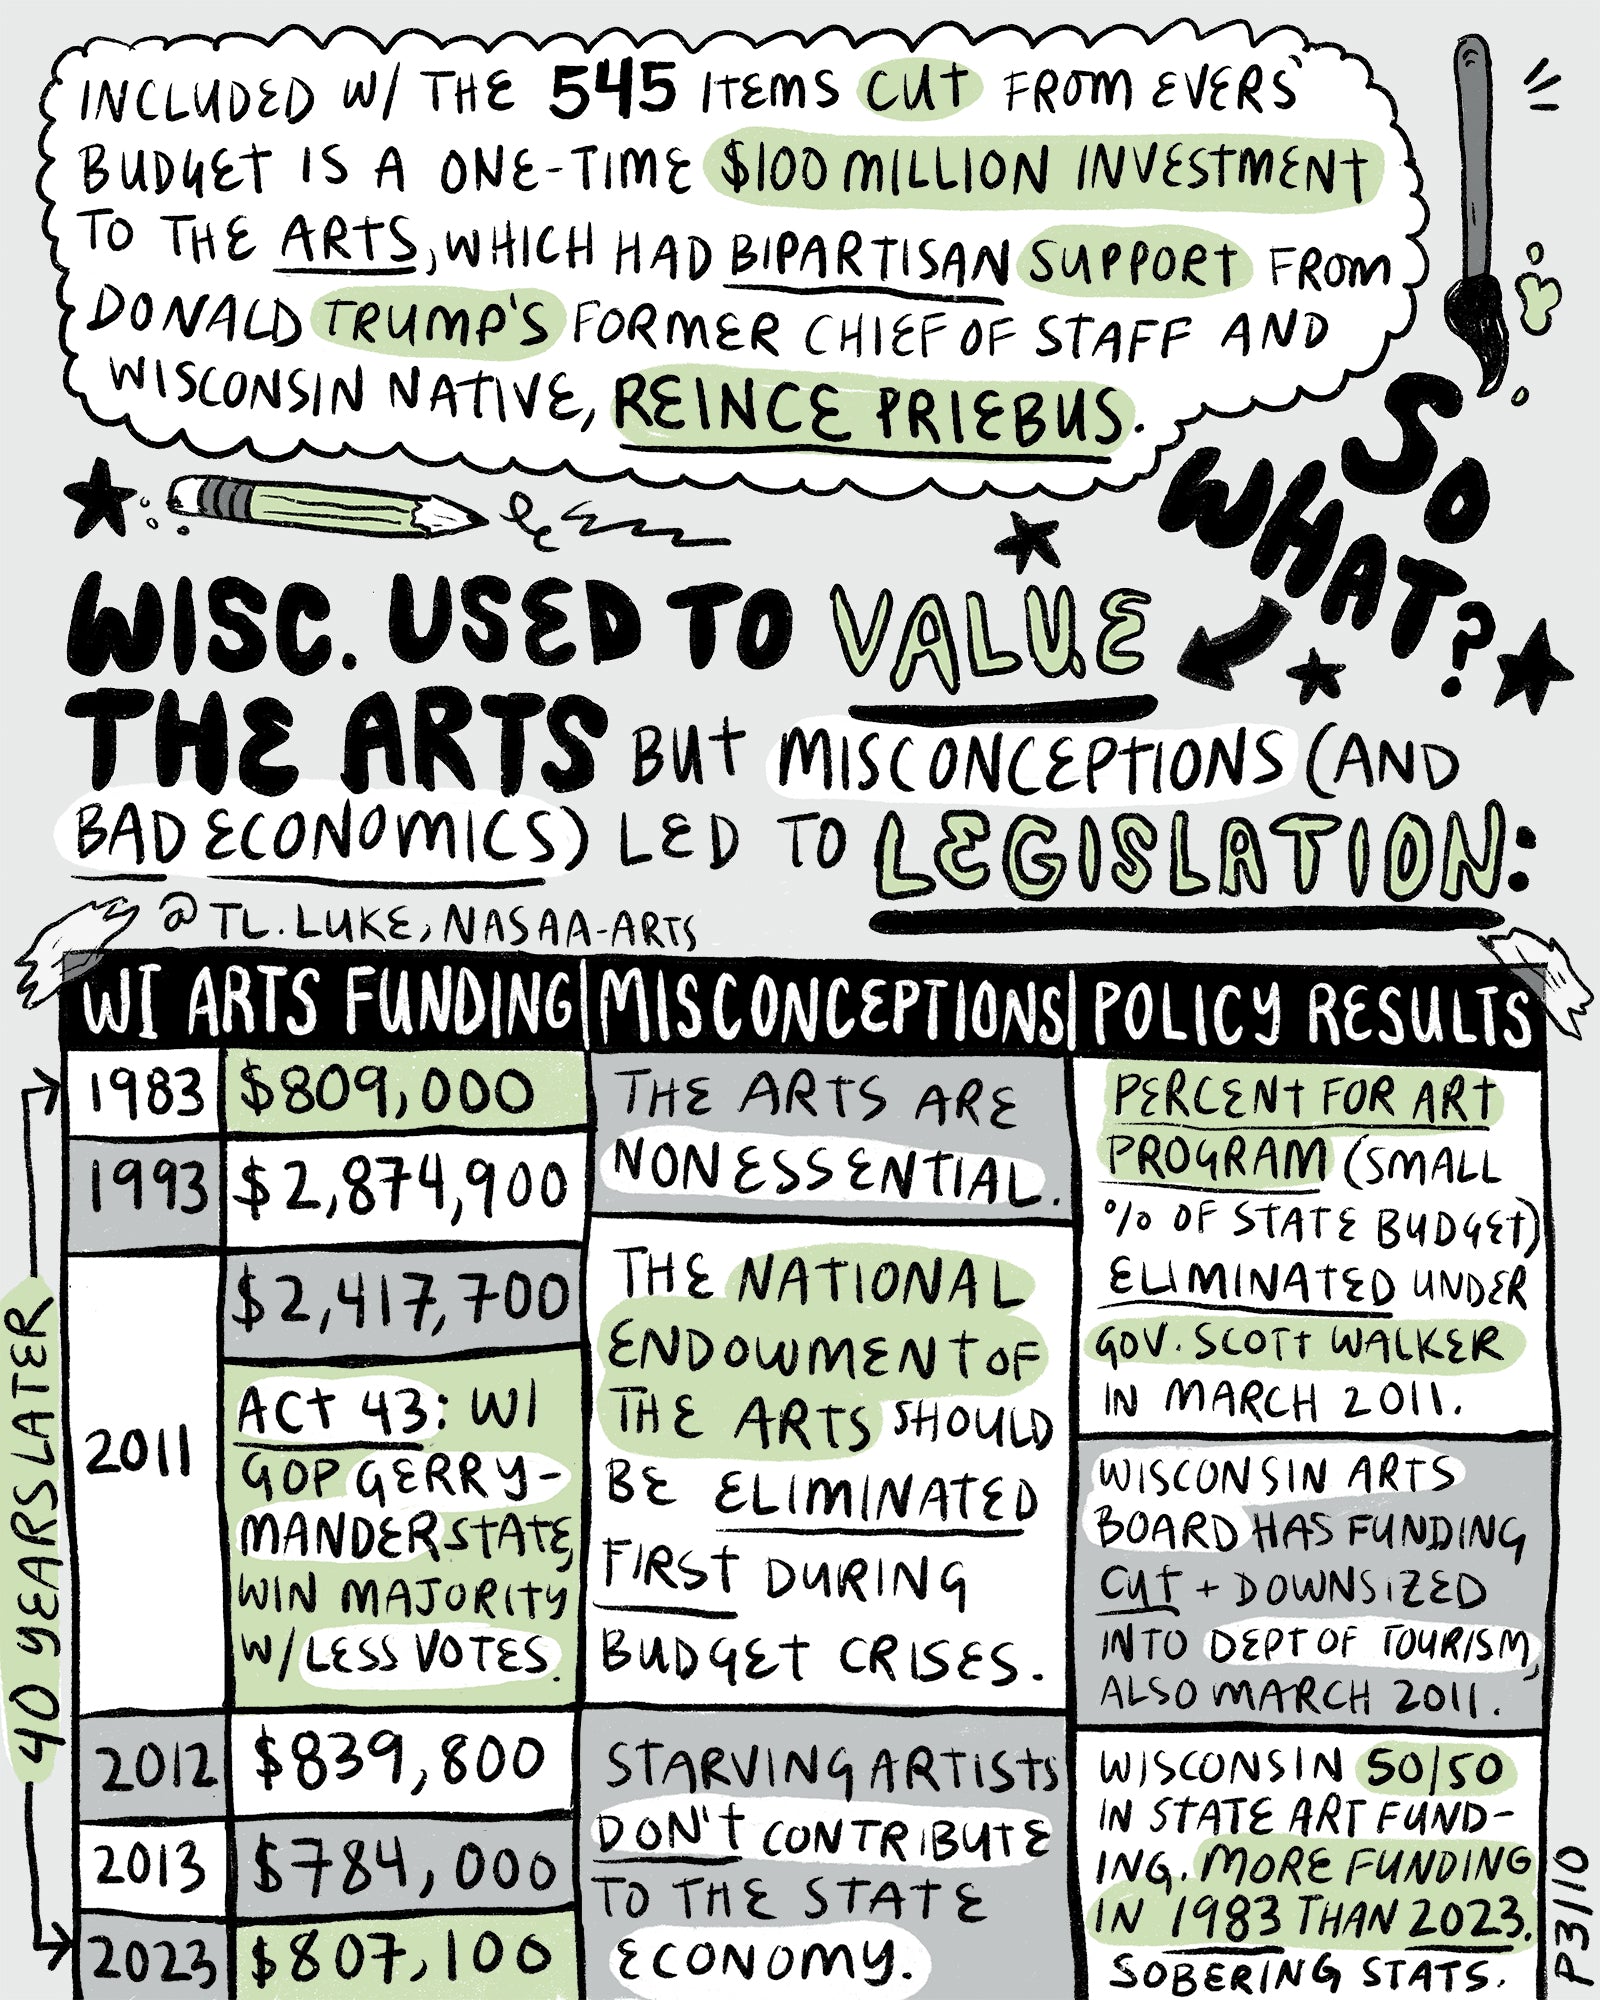 Page 3 of Auntie Luke's Art Economy Guide, this covers WI Arts Funding stats, misconceptions, and legislation passed.